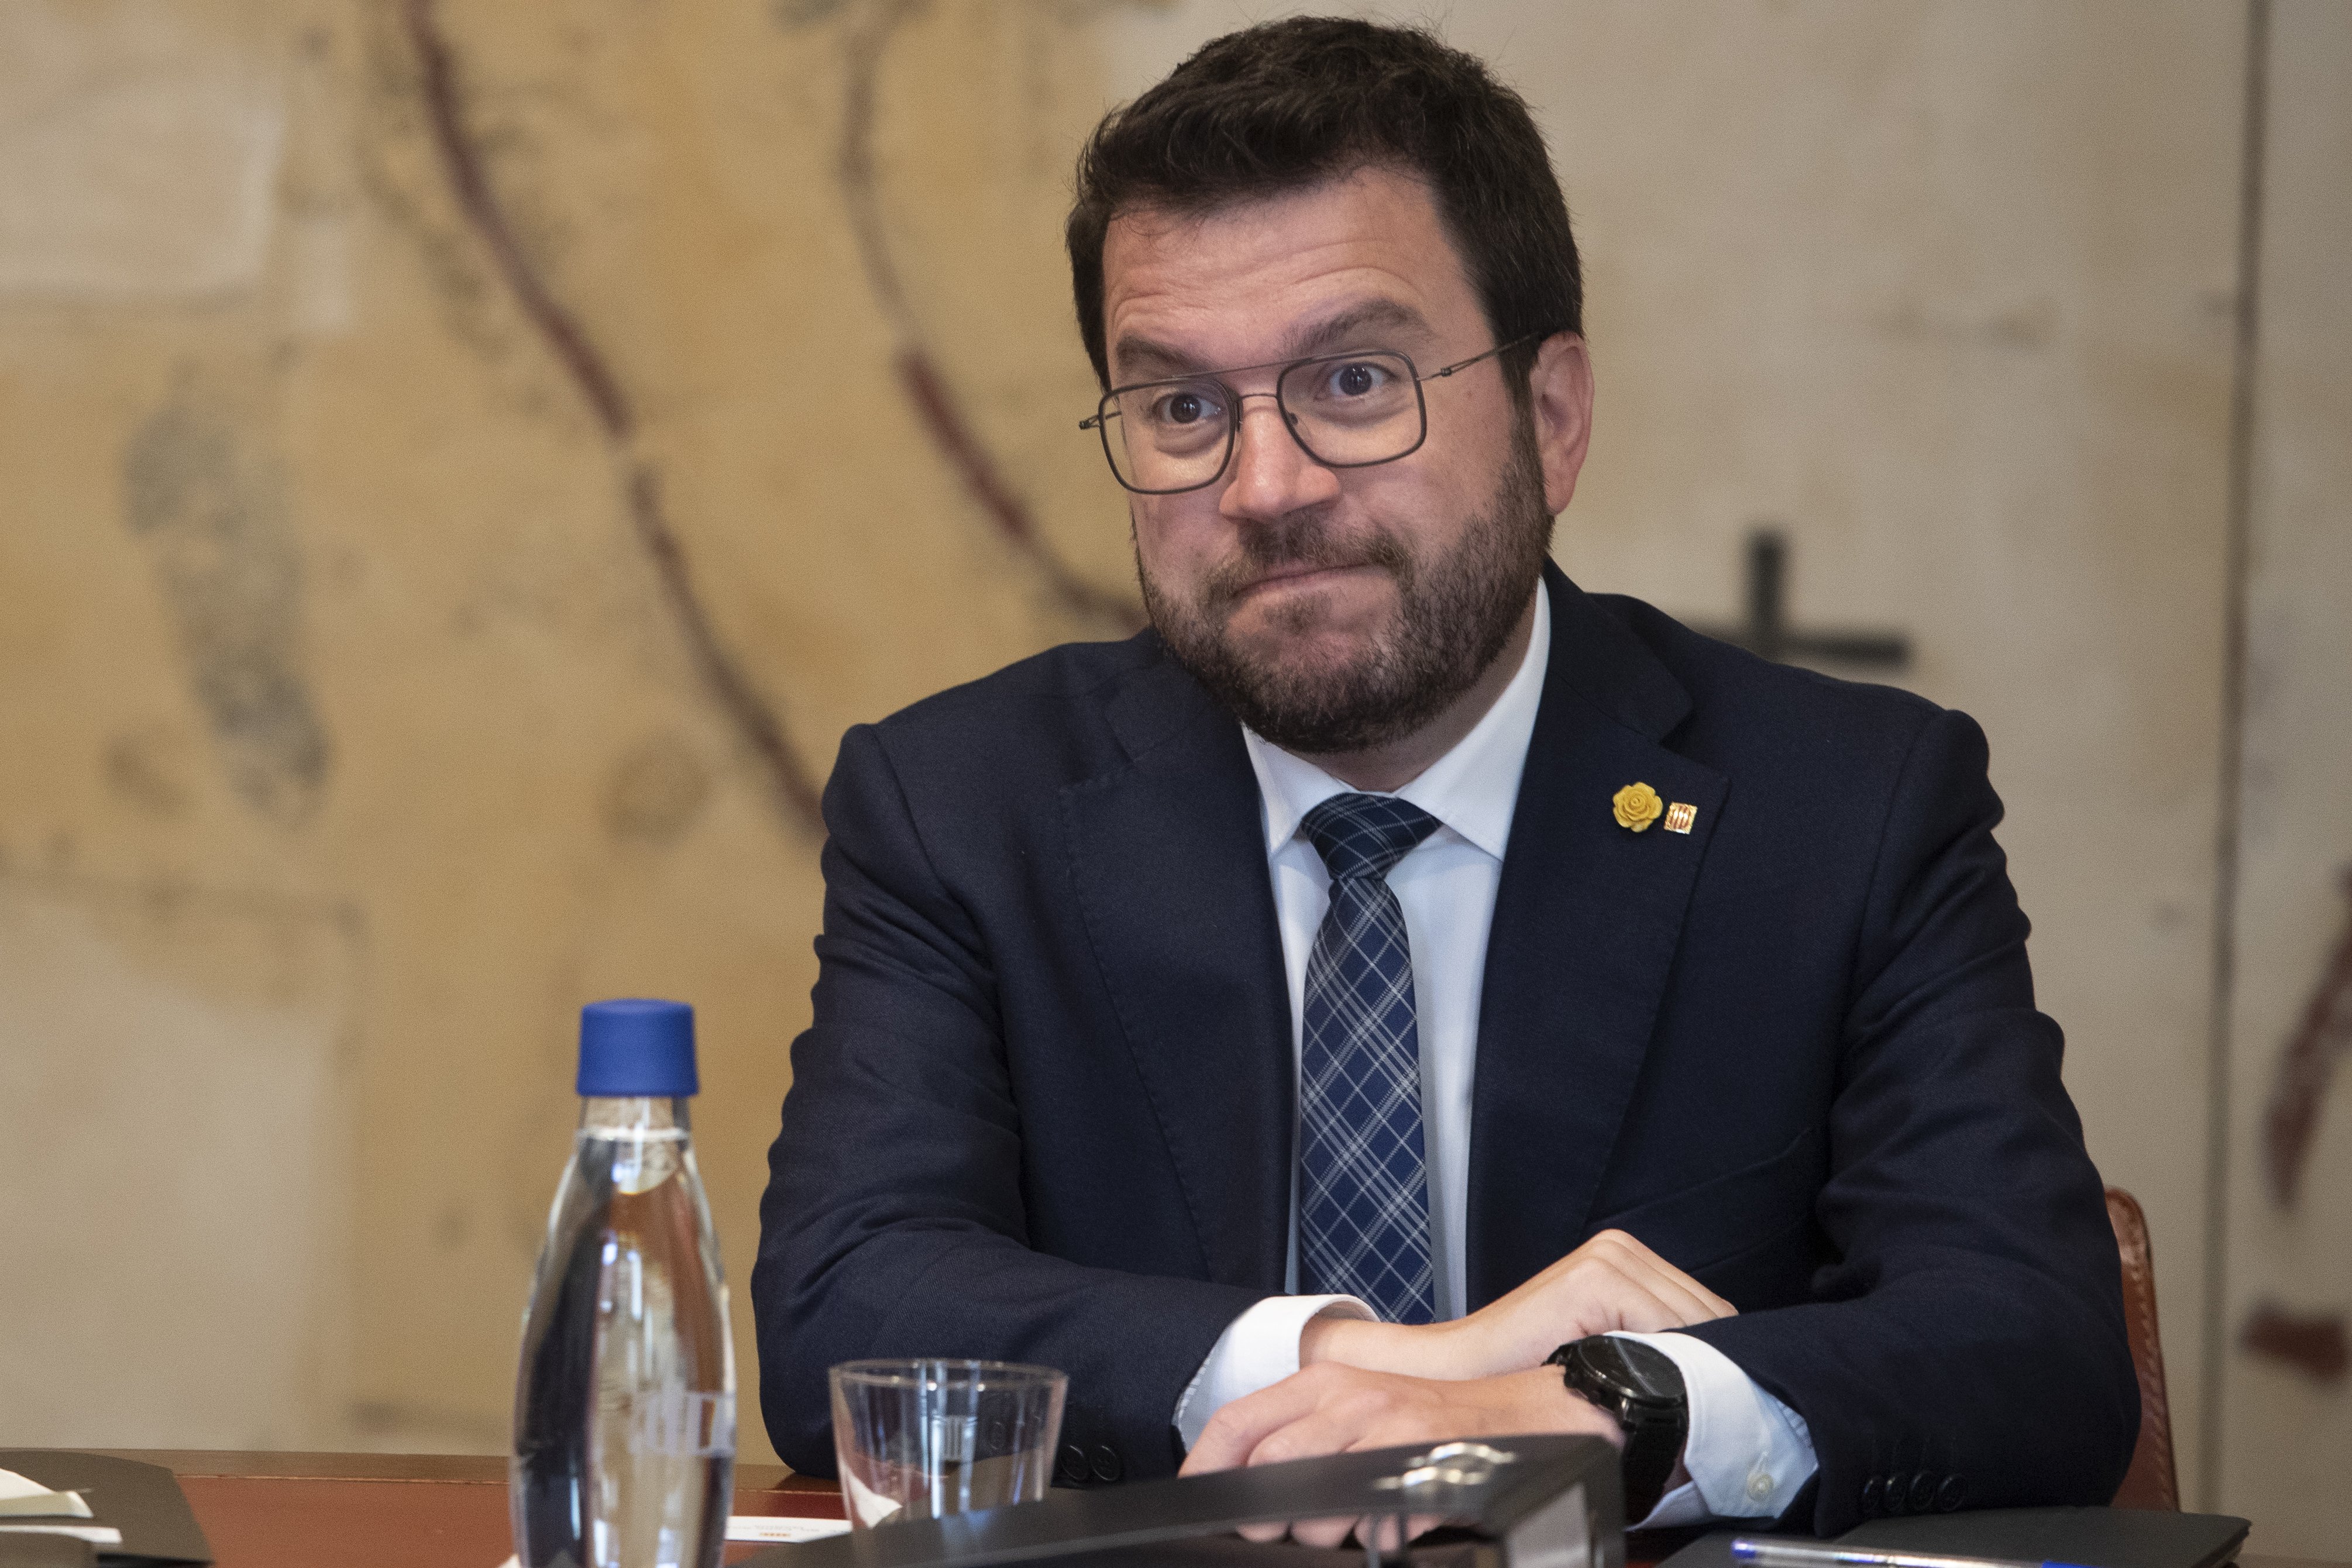 Winter Olympics: joint Pyrenees bid collapses and Catalan candidacy is an option